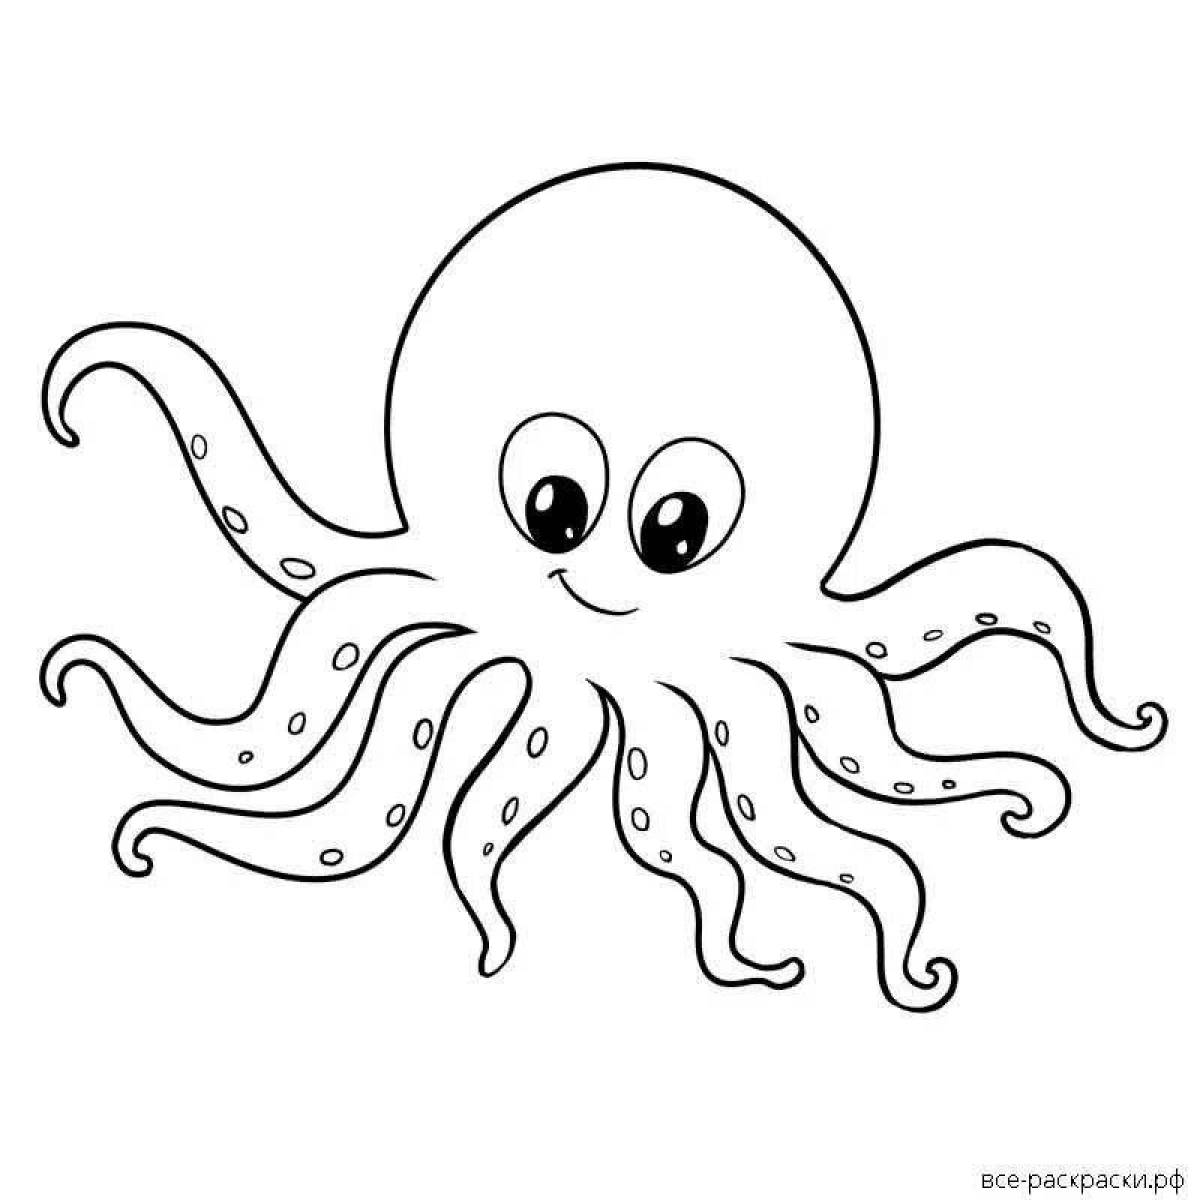 Dramatic octopus coloring page